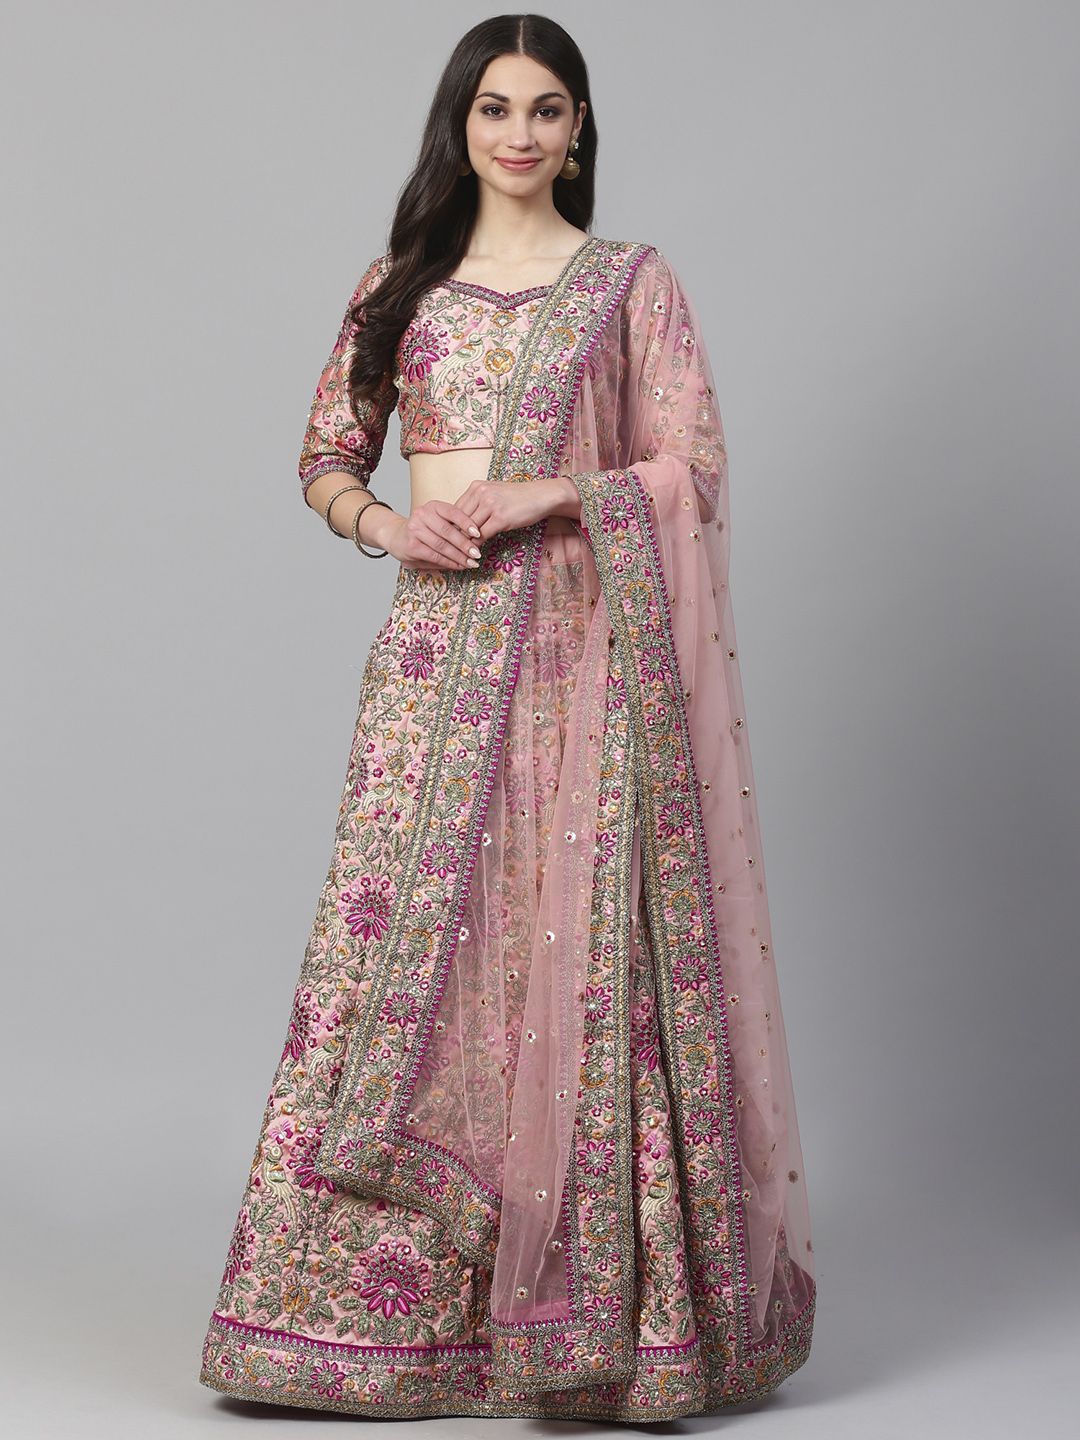 Readiprint Fashions Pink & Golden Semi-Stitched Lehenga & Unstitched Blouse with Dupatta Price in India